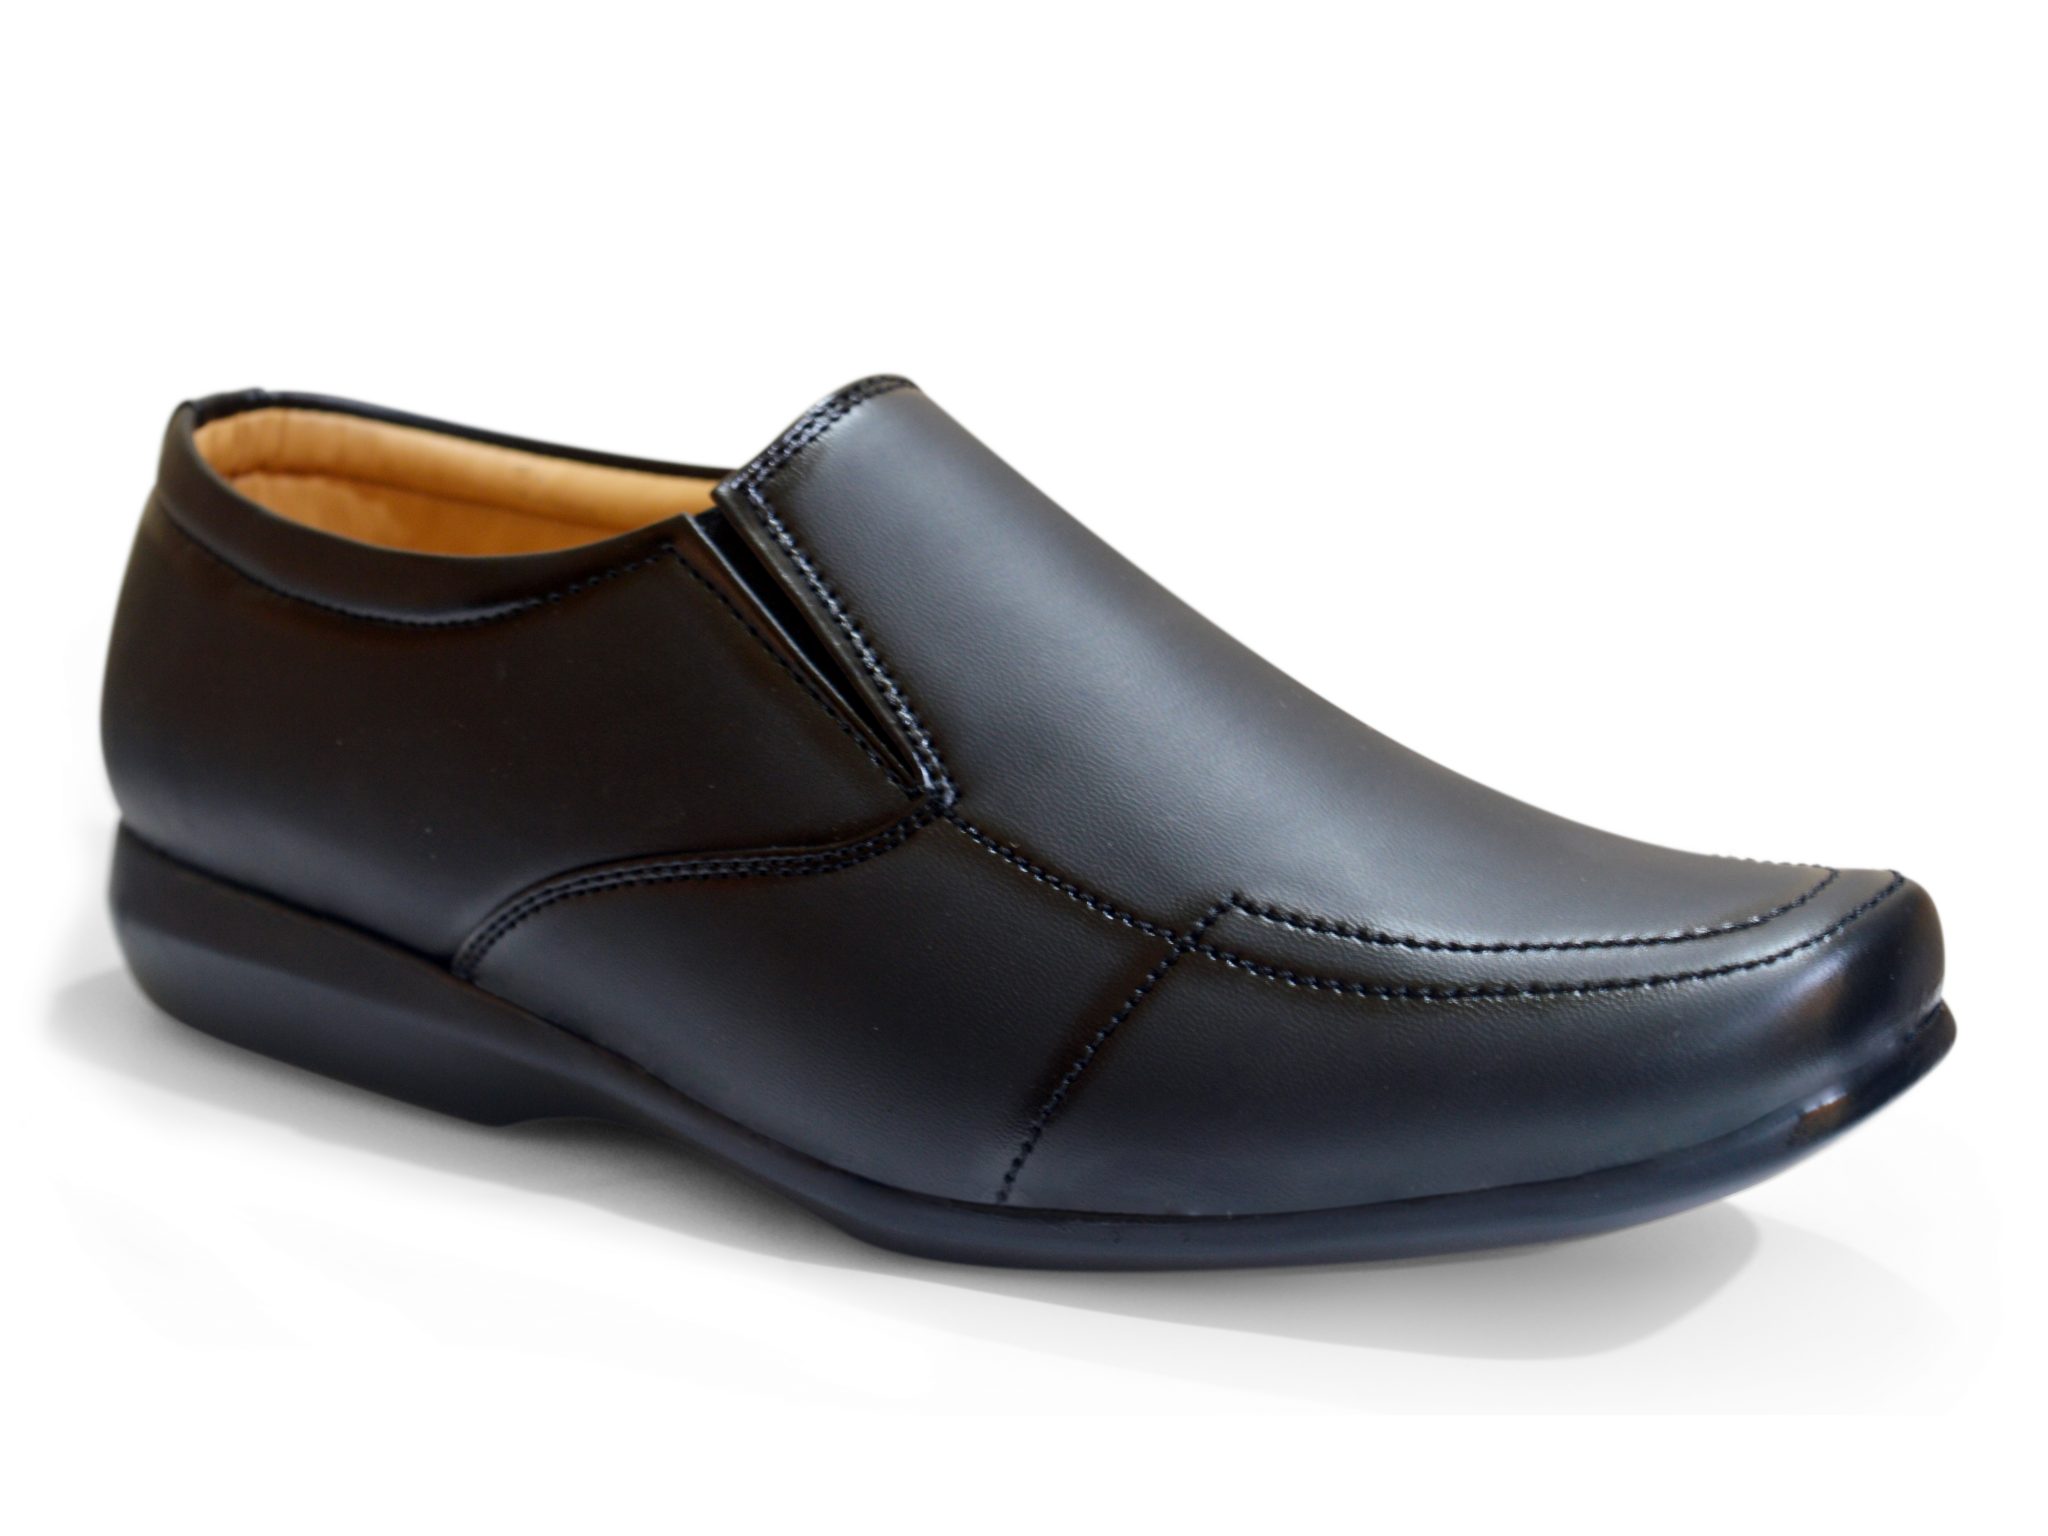 Formal Black Shoes For Men | Without Lace | Flat Sole